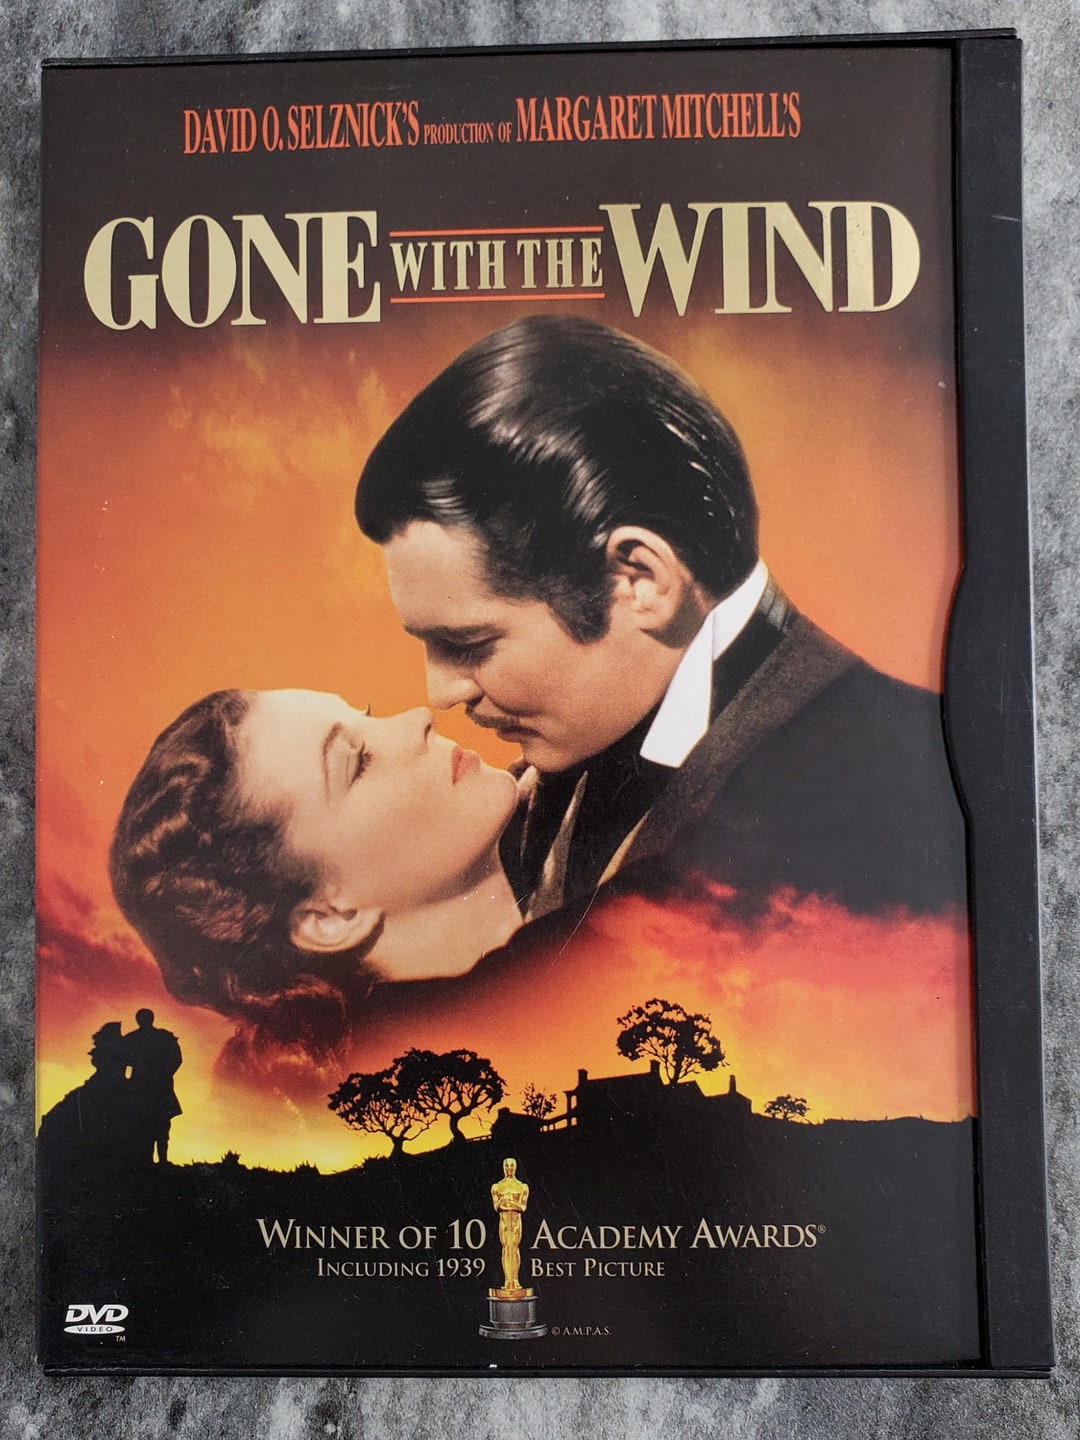 the　Gone　Etsy　DVD　Very　With　Australia　Wind　Good